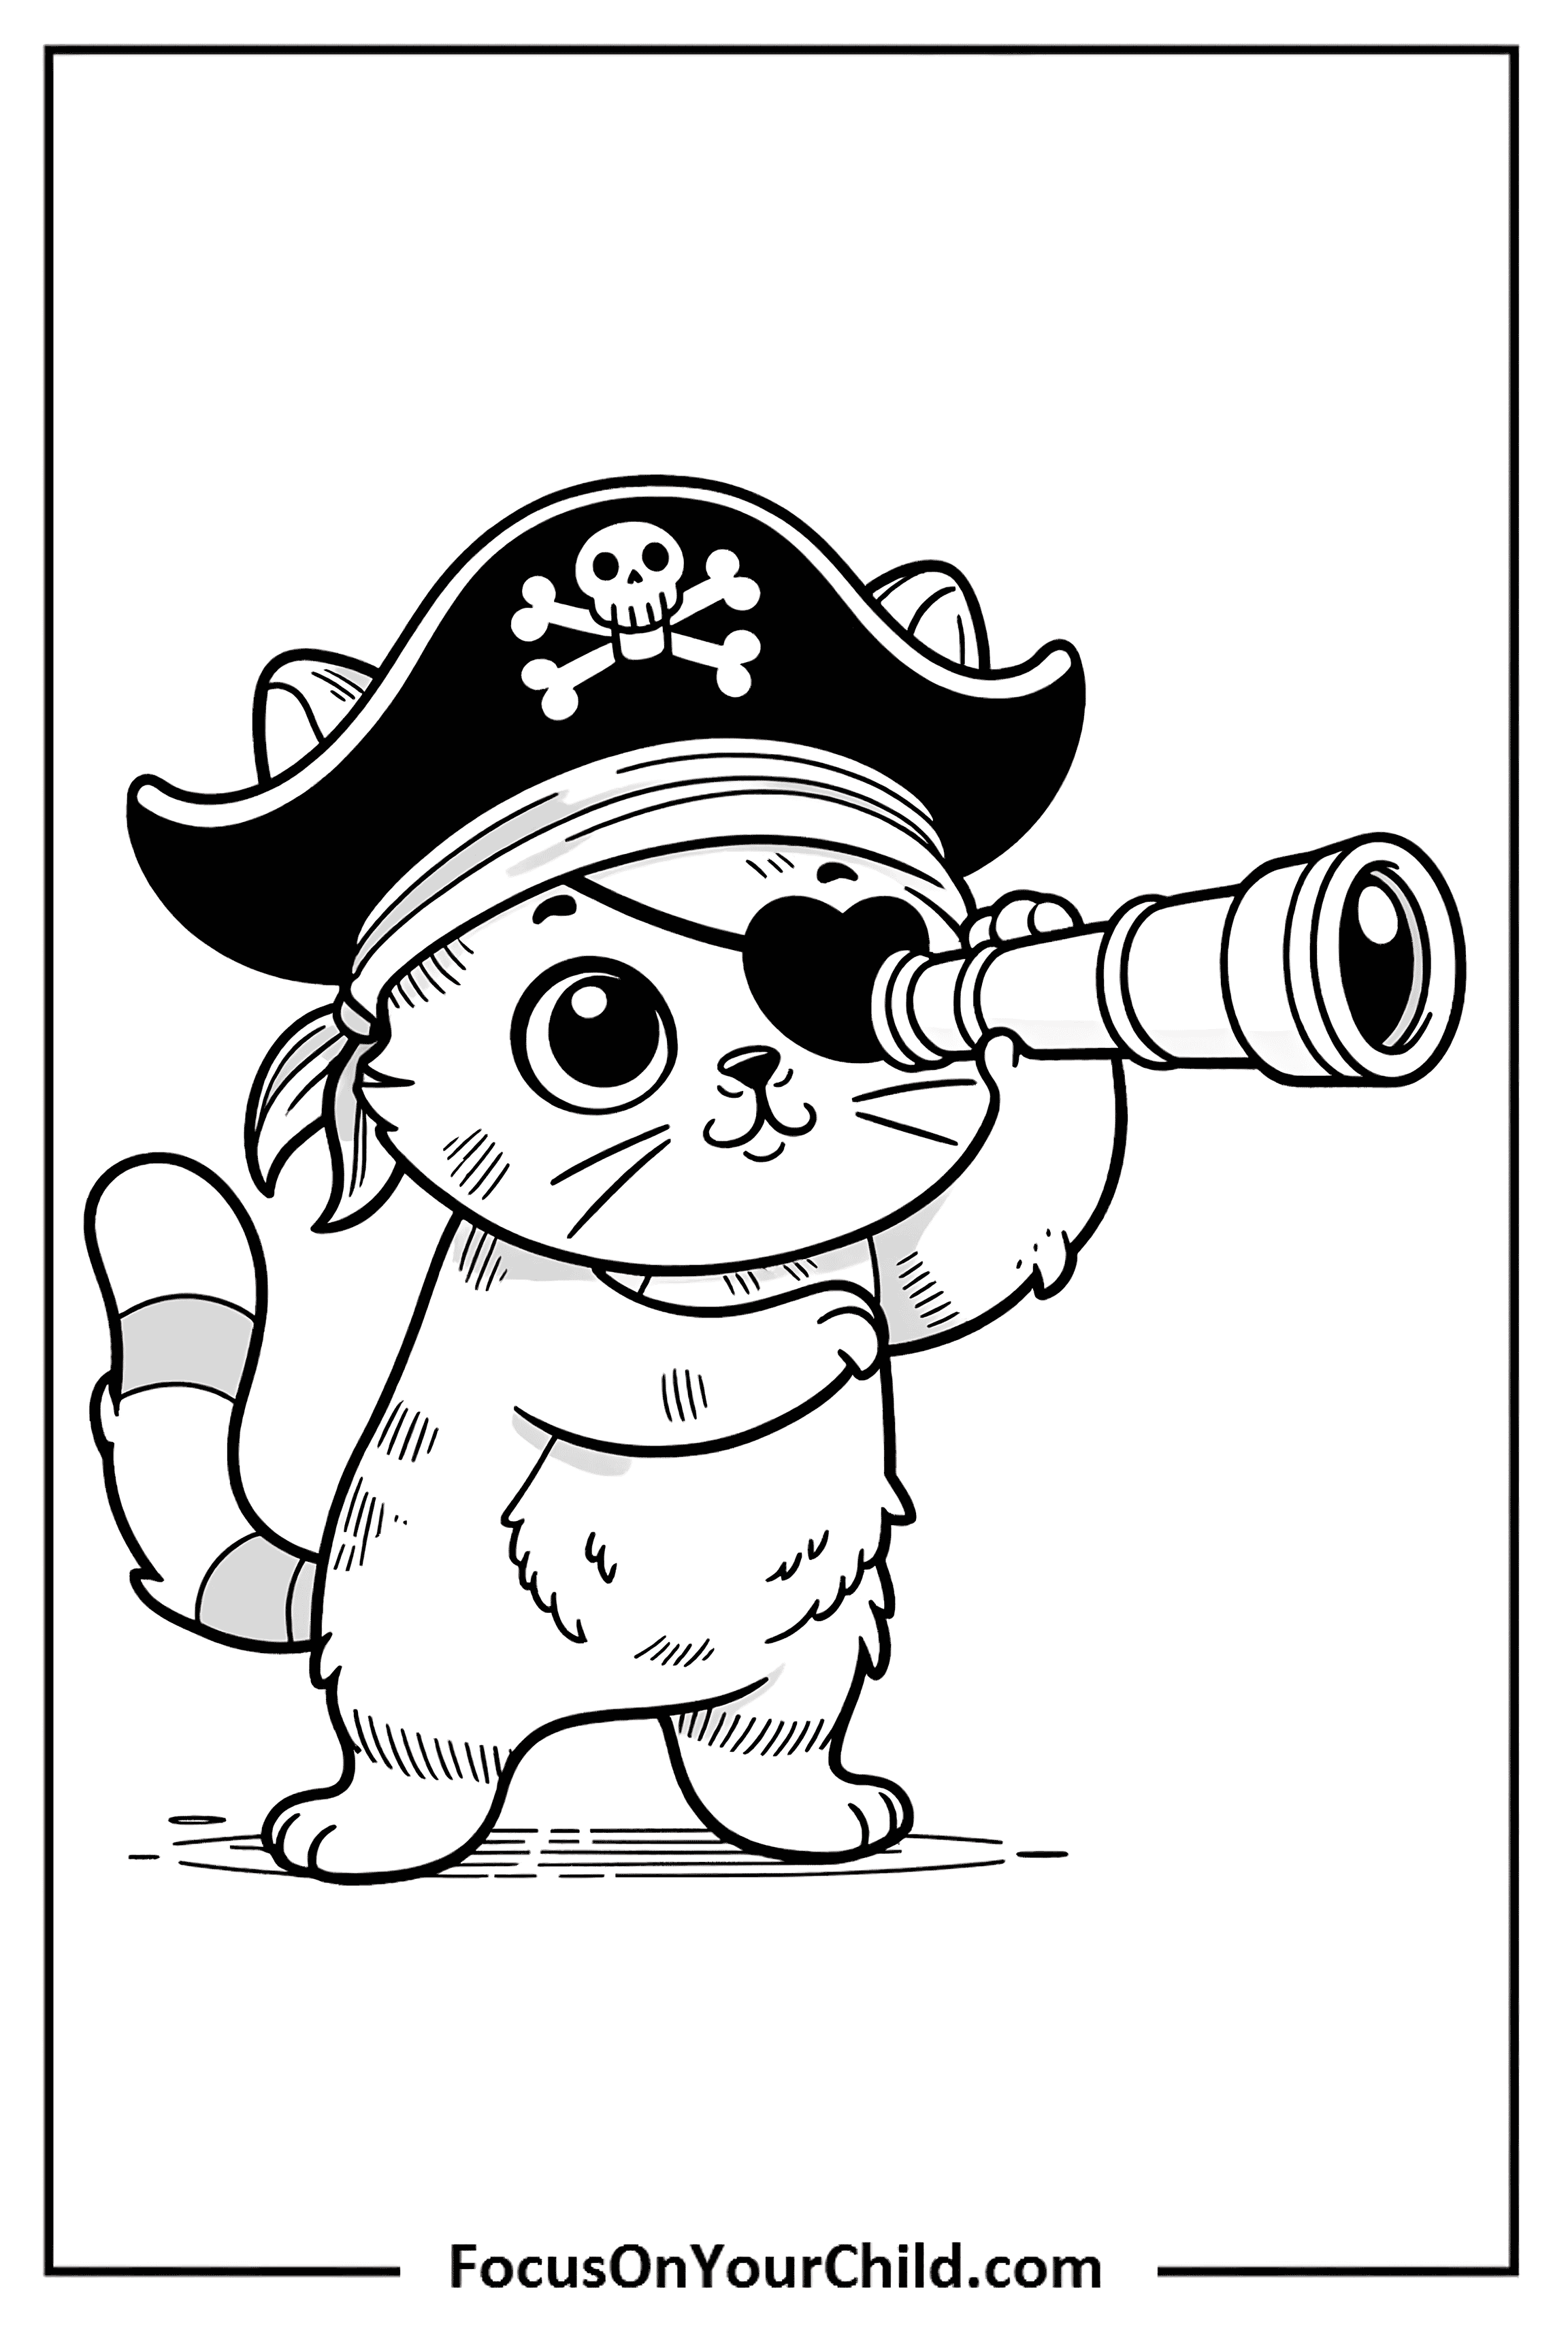 Adorable pirate kitty with eye patch, hat, and spyglass, perfect for childrens content.